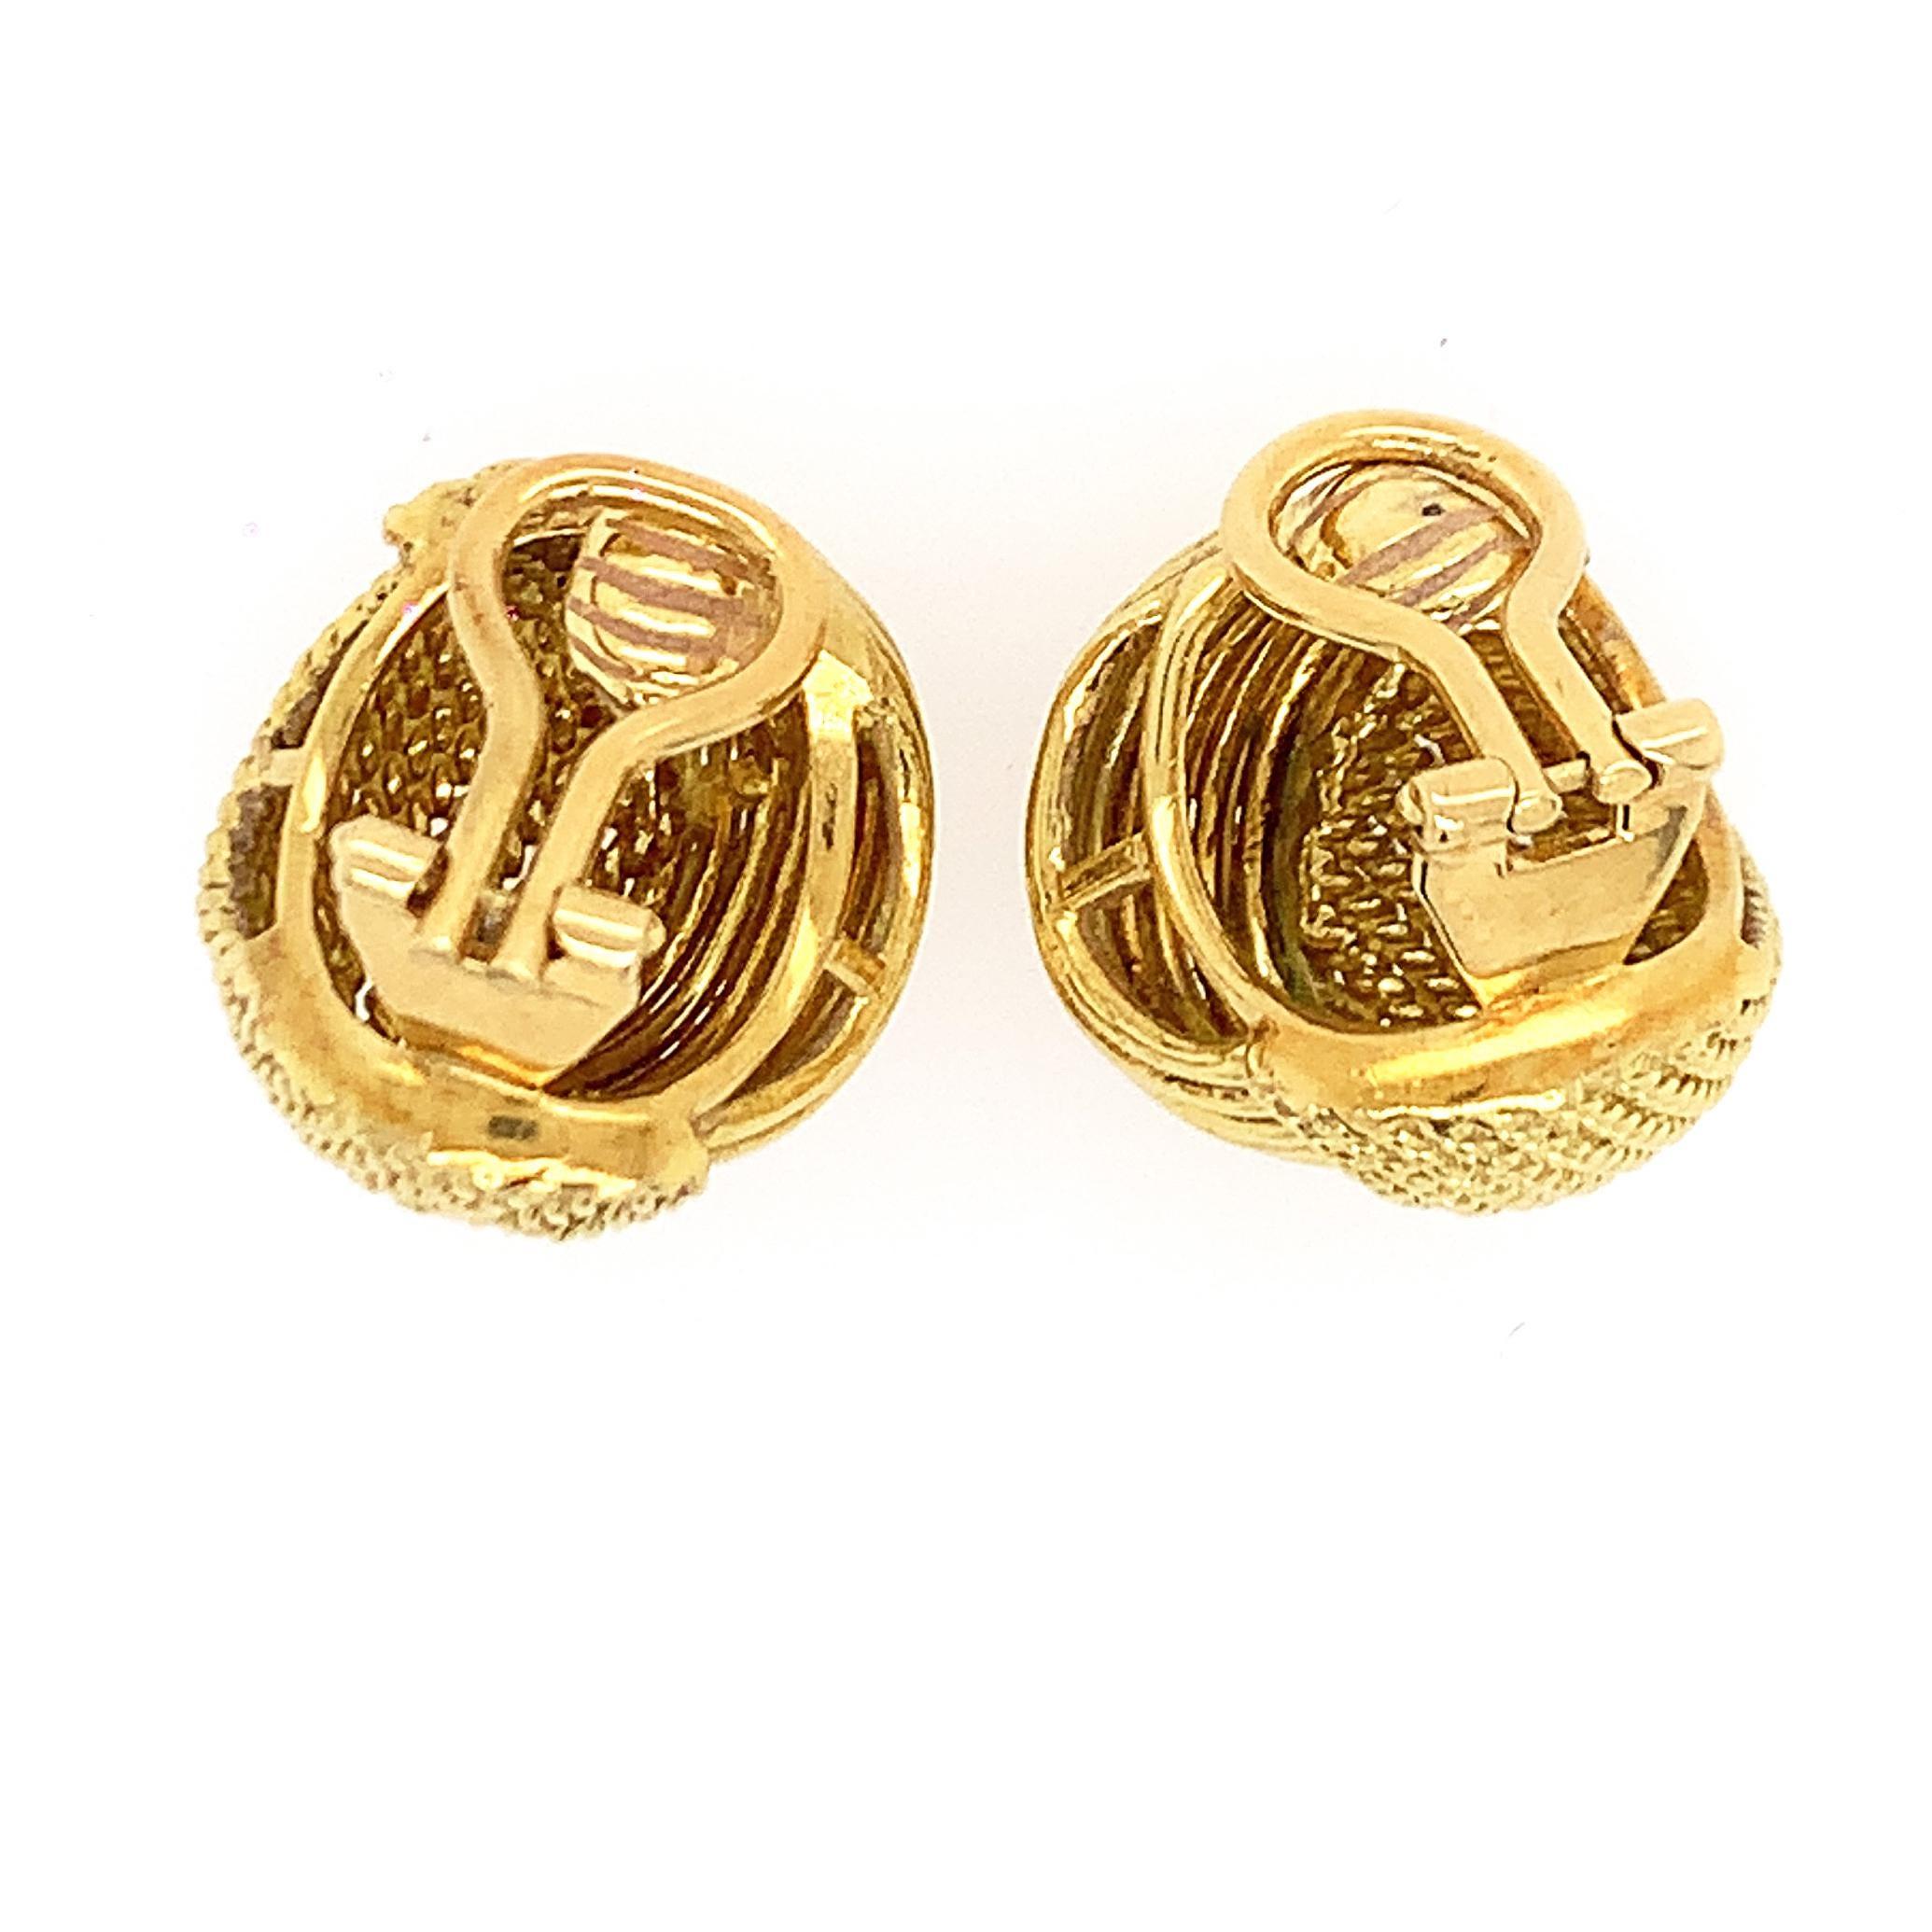 18K Y/gold earclips, stamps 18 KT Made in Italy, measures 7/8 inch in diameter, weight 12 dwt.